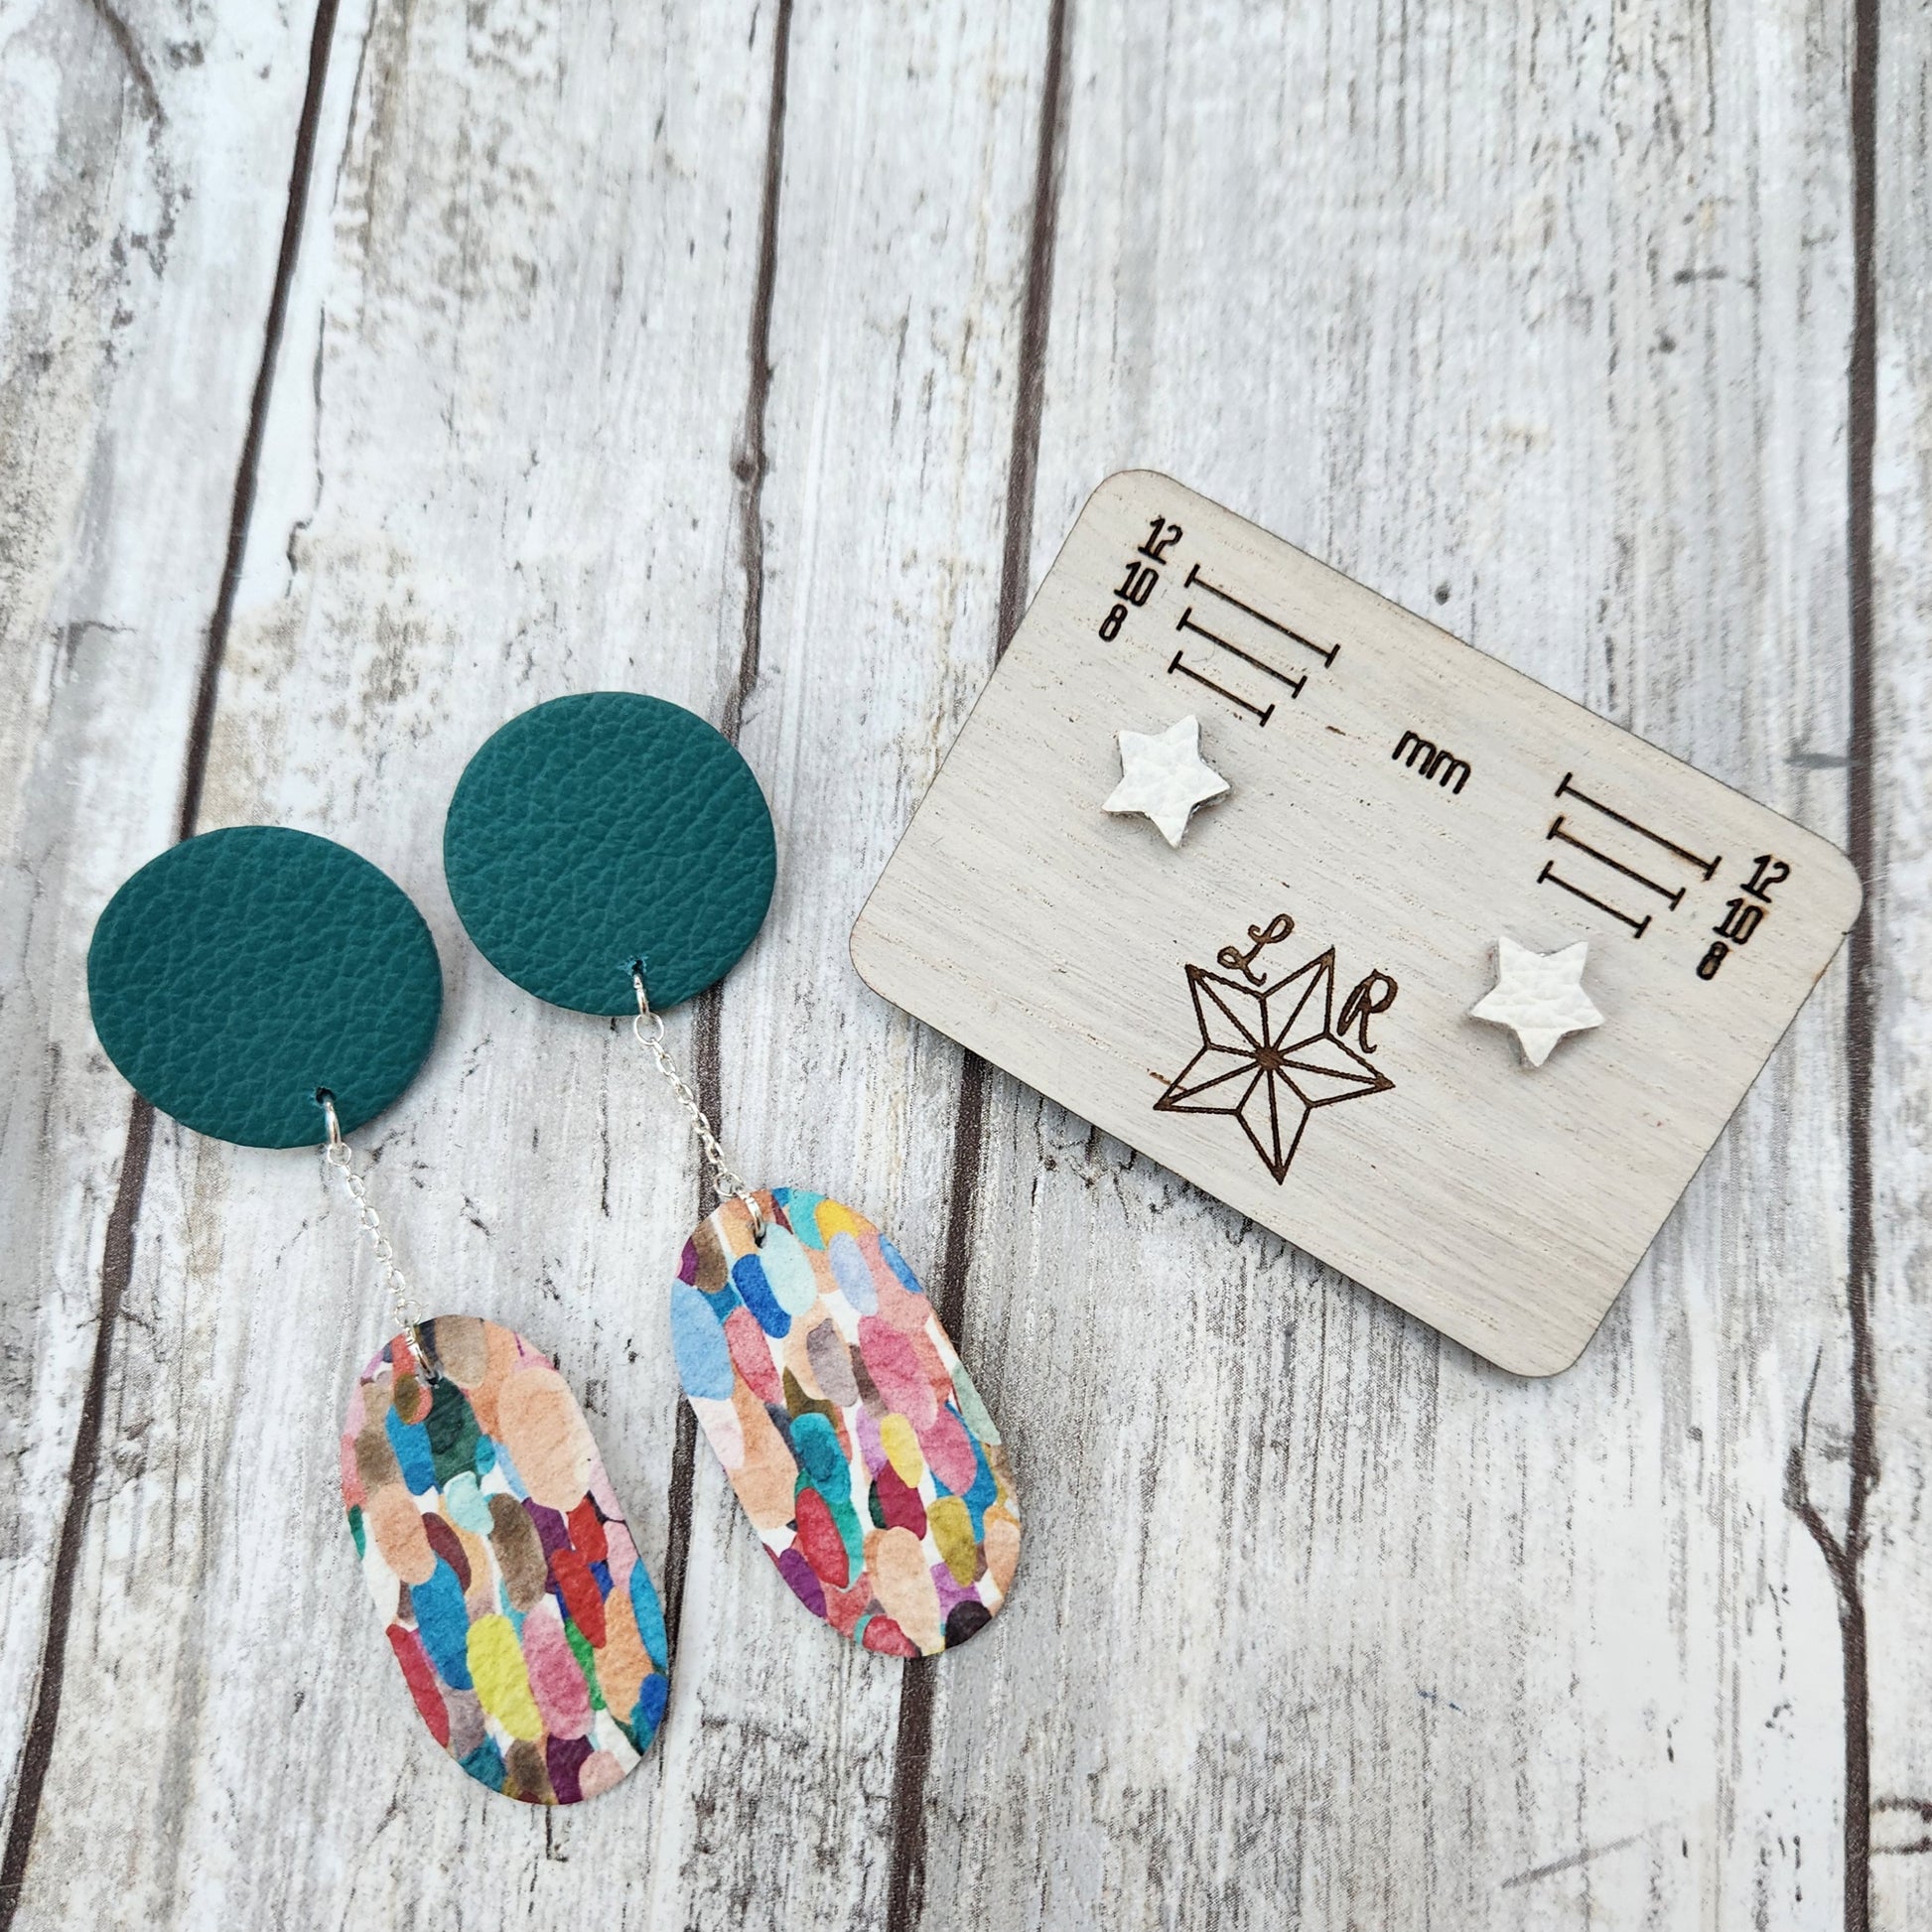 Summer themed leather earrings. Rachel has a teal leather circle and a confetti print oval hanging off it on a silver chain. With white star Lil studs.